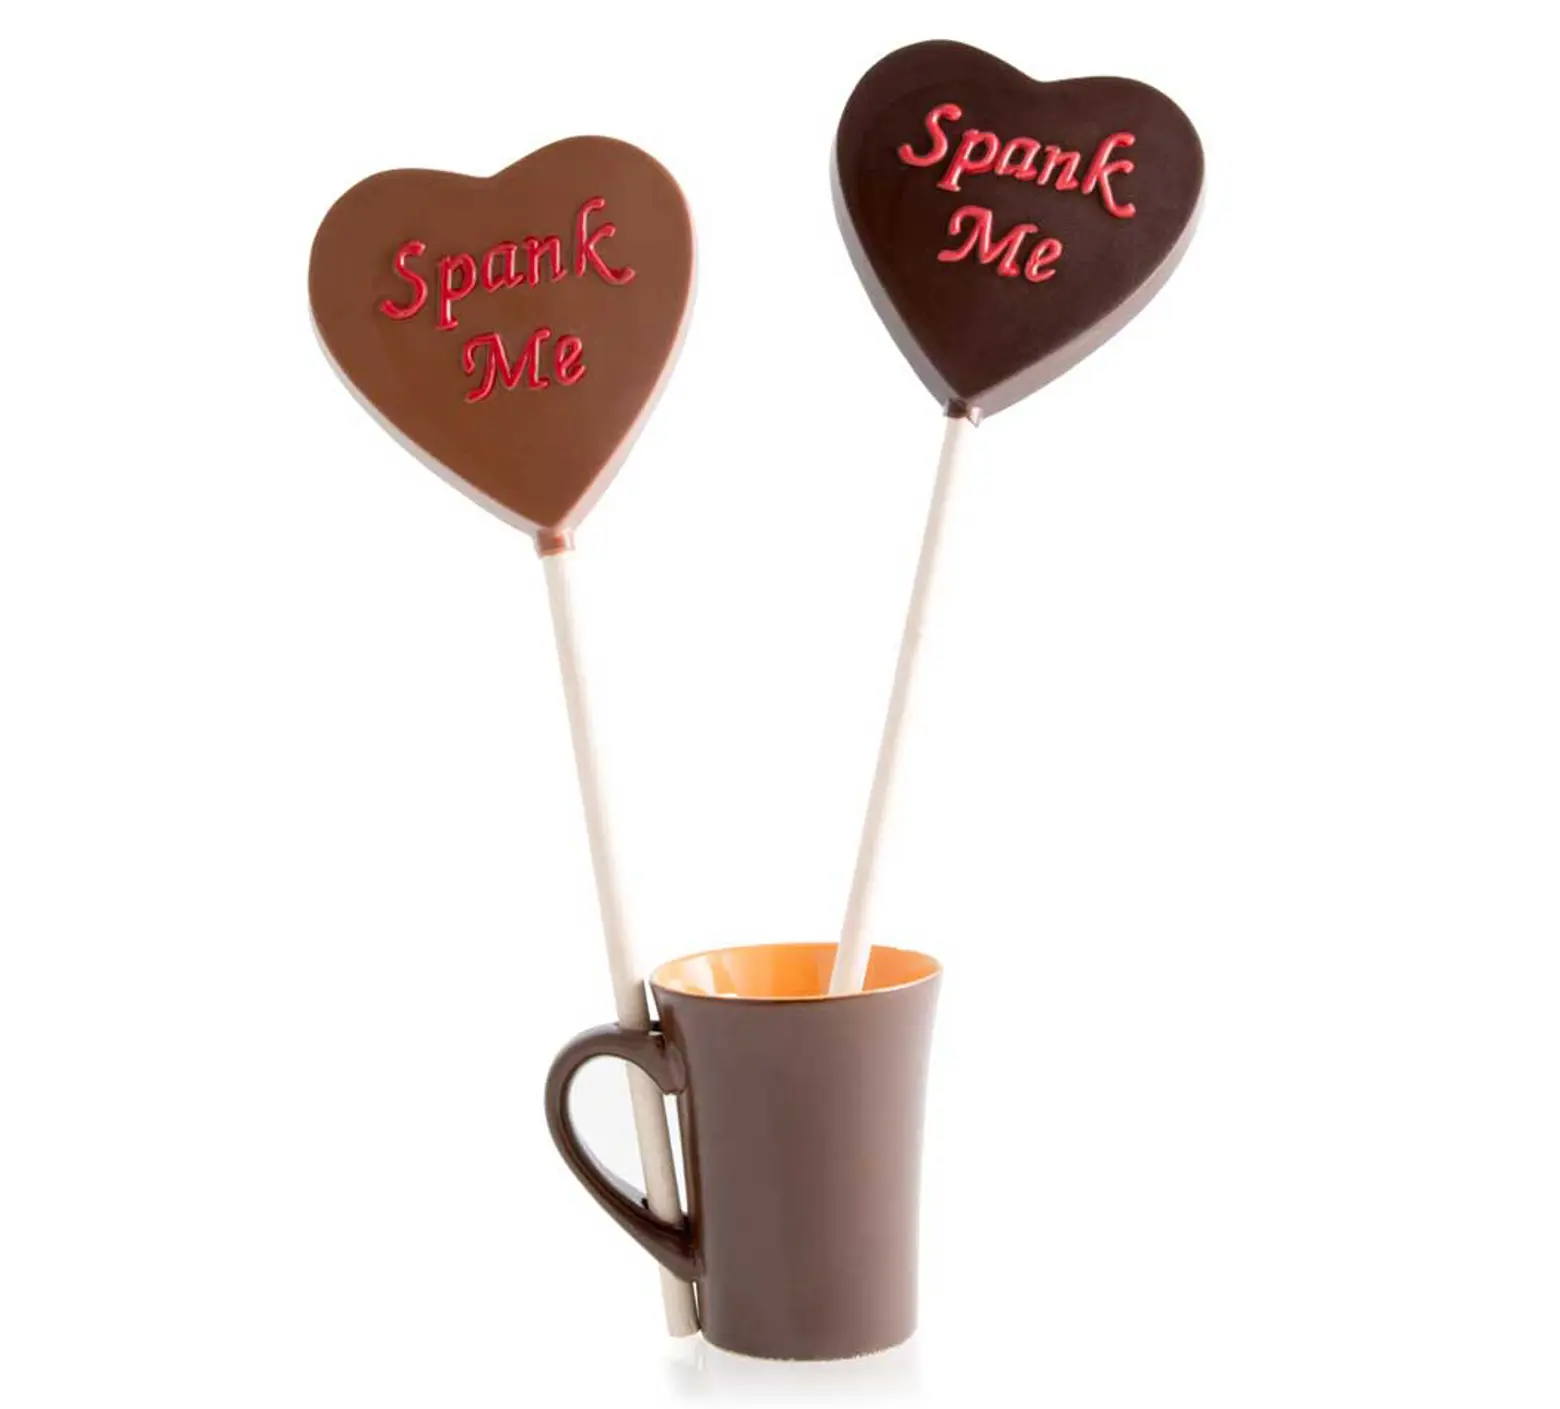 Jacques Torres Chocolate, Spank Me, chocolate lollipop, Valentine's gifts